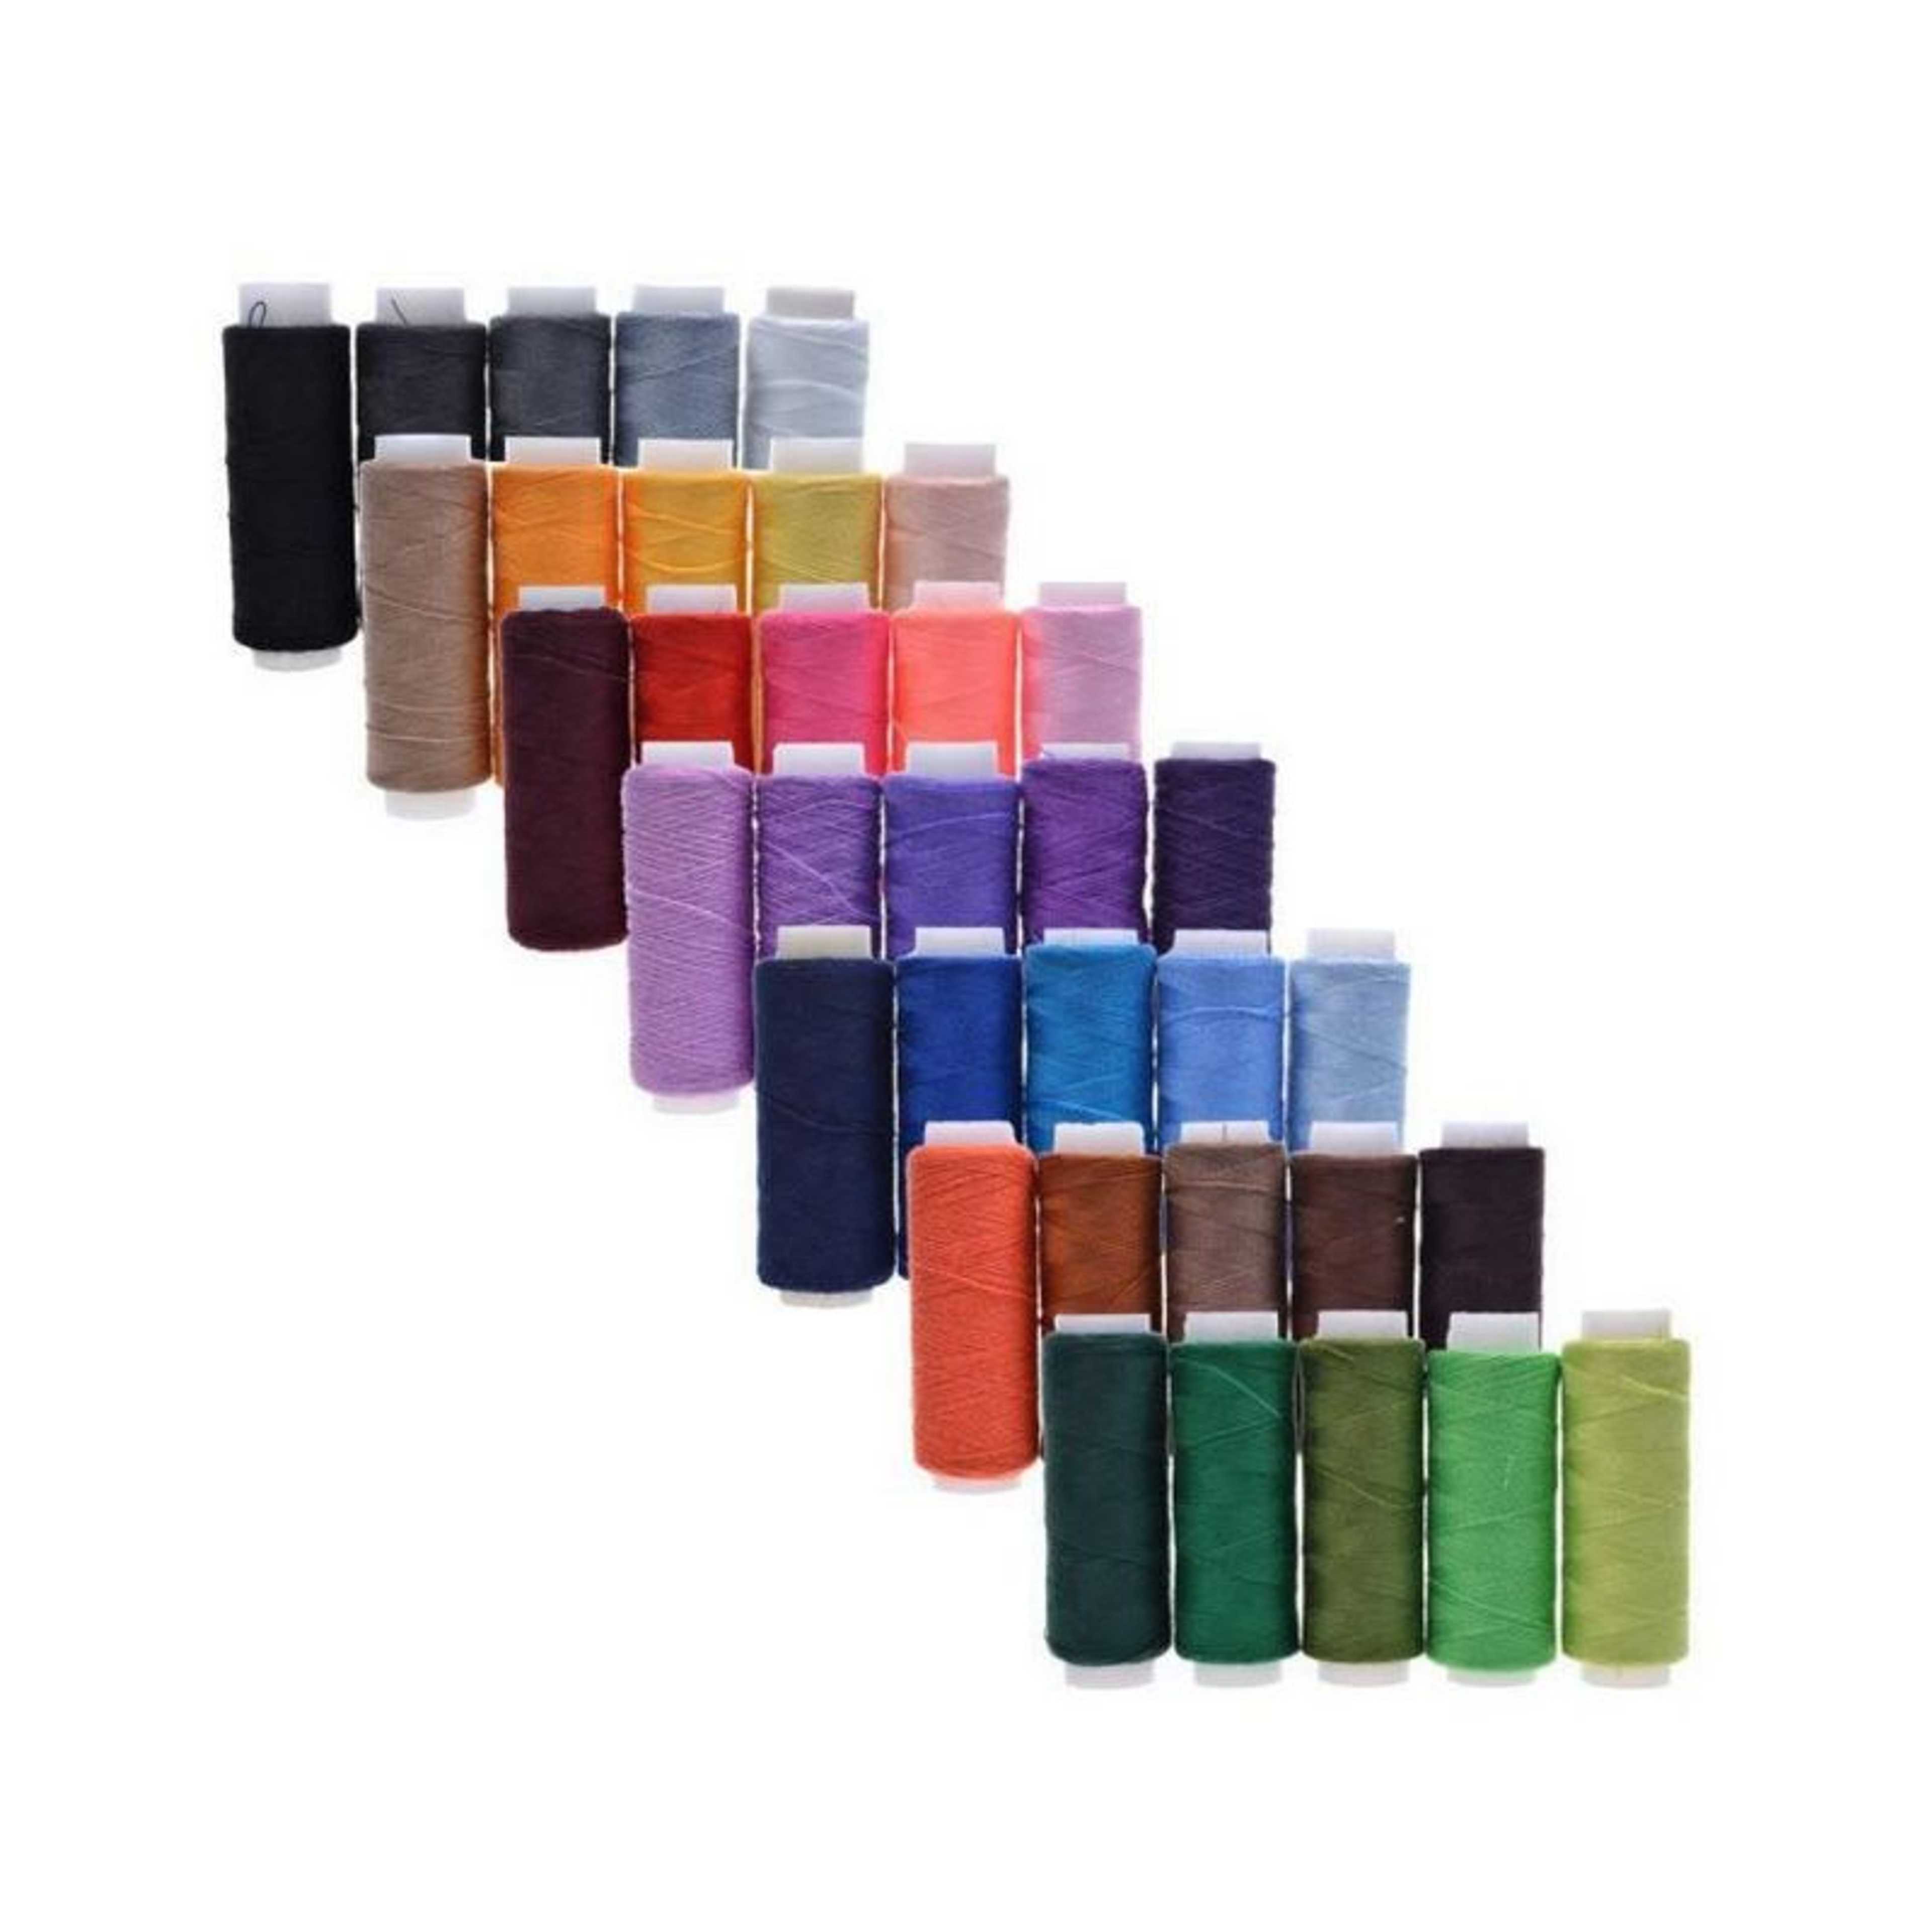 20 Assorted Colors of Sewing Threads